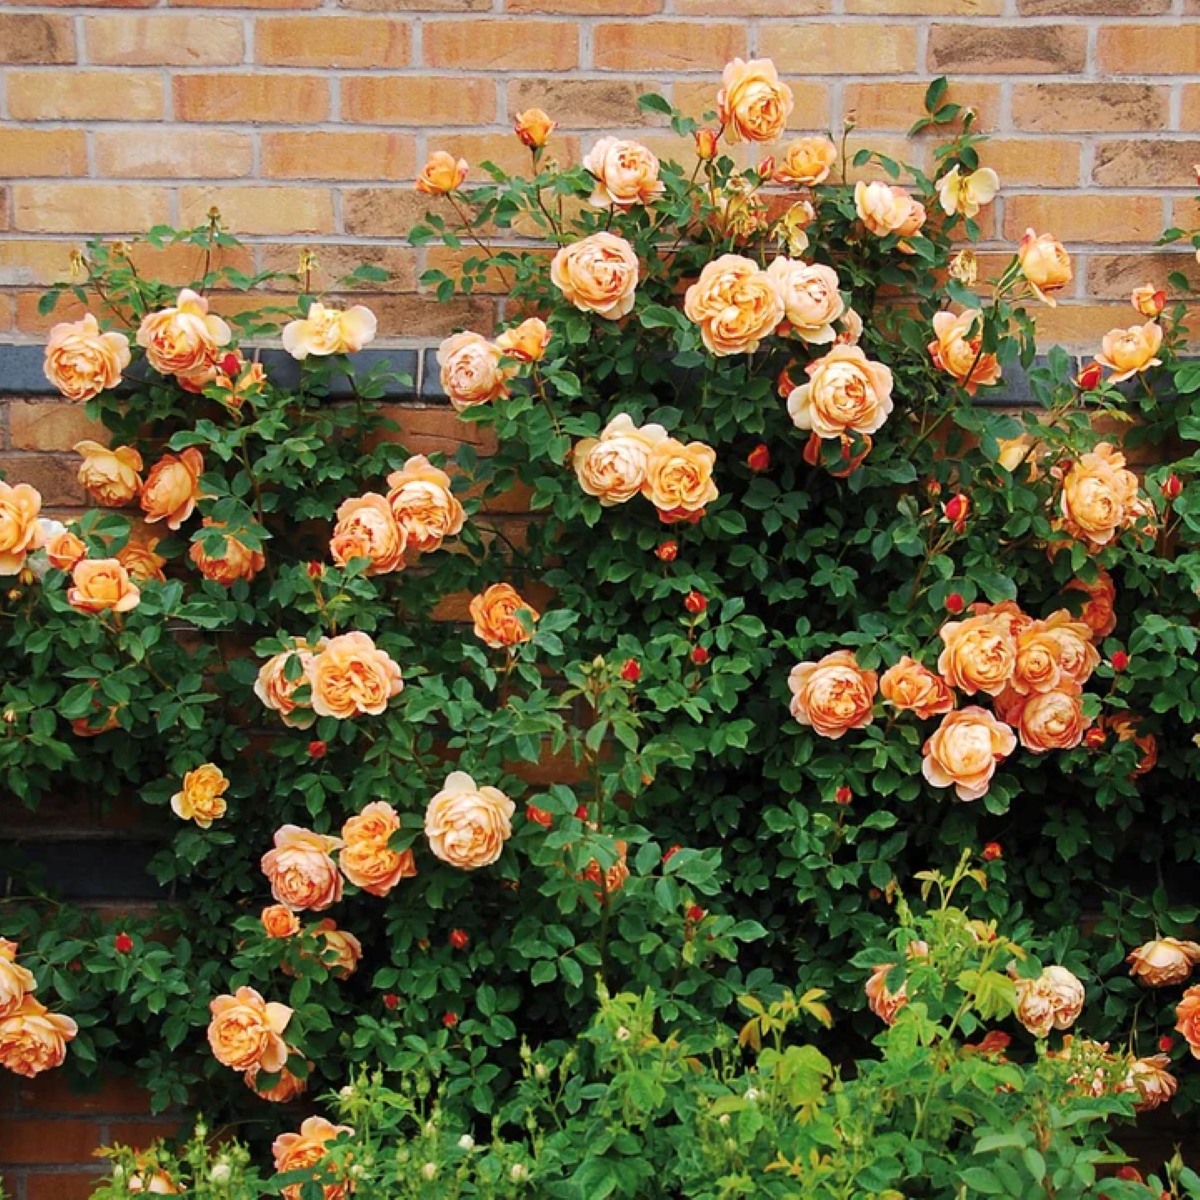 Red bronze colored roses climbing brick wall